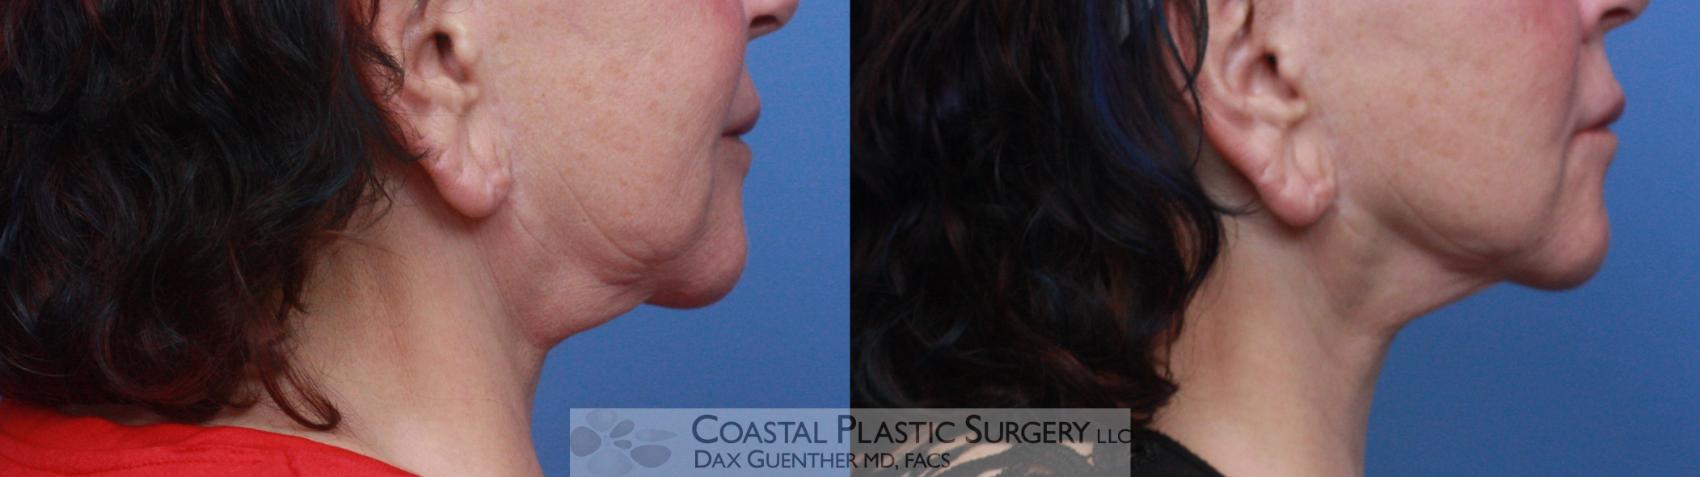 Before & After Skin Tightening Case 120 Right Side View in Hingham, MA